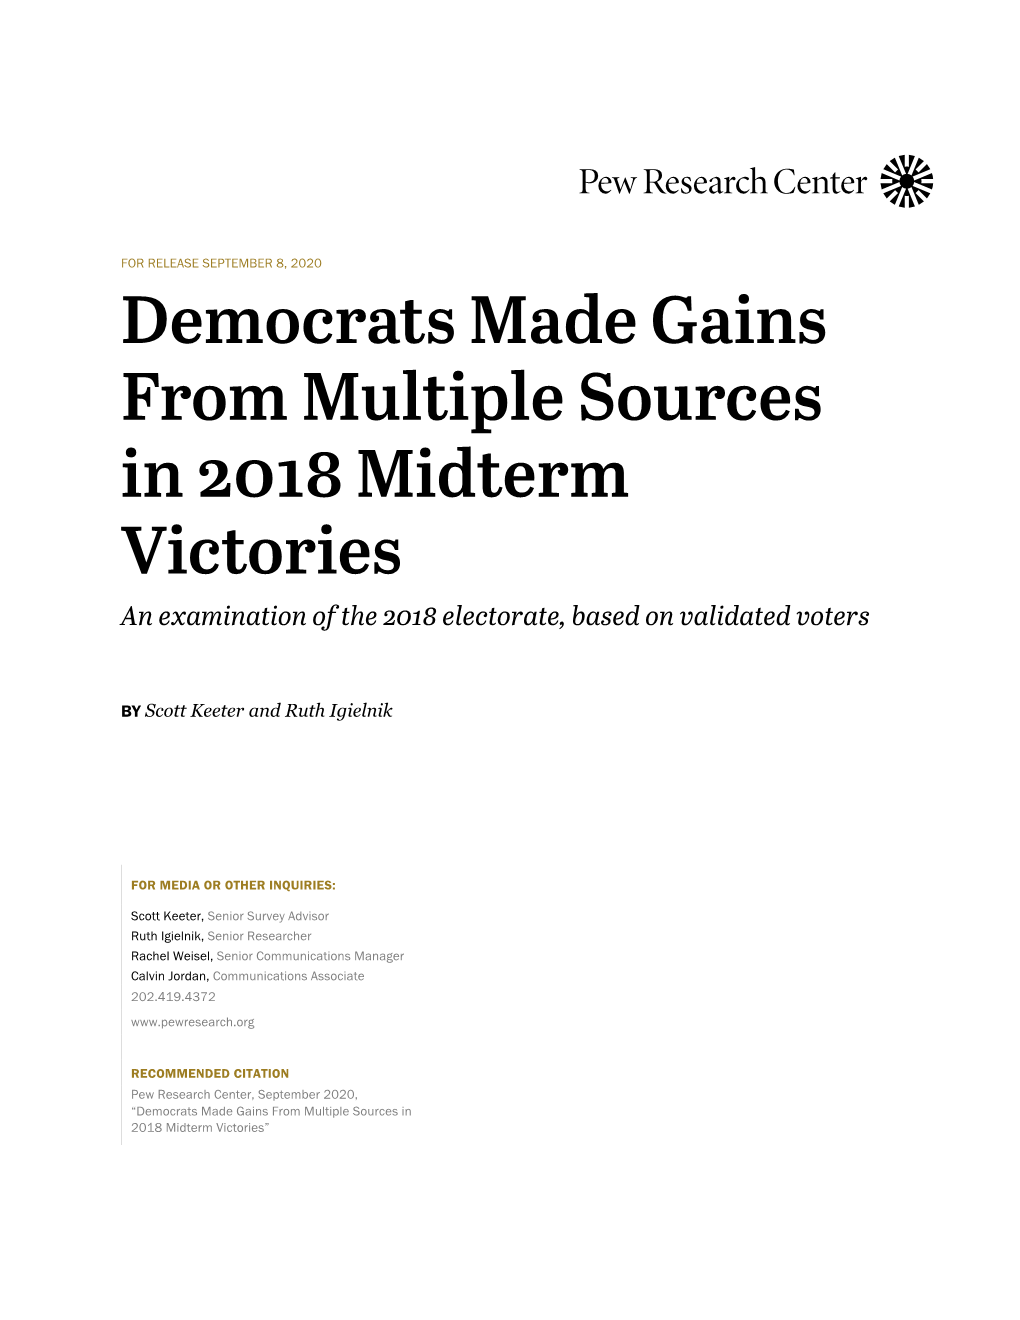 Democrats Made Gains from Multiple Sources in 2018 Midterm Victories an Examination of the 2018 Electorate, Based on Validated Voters